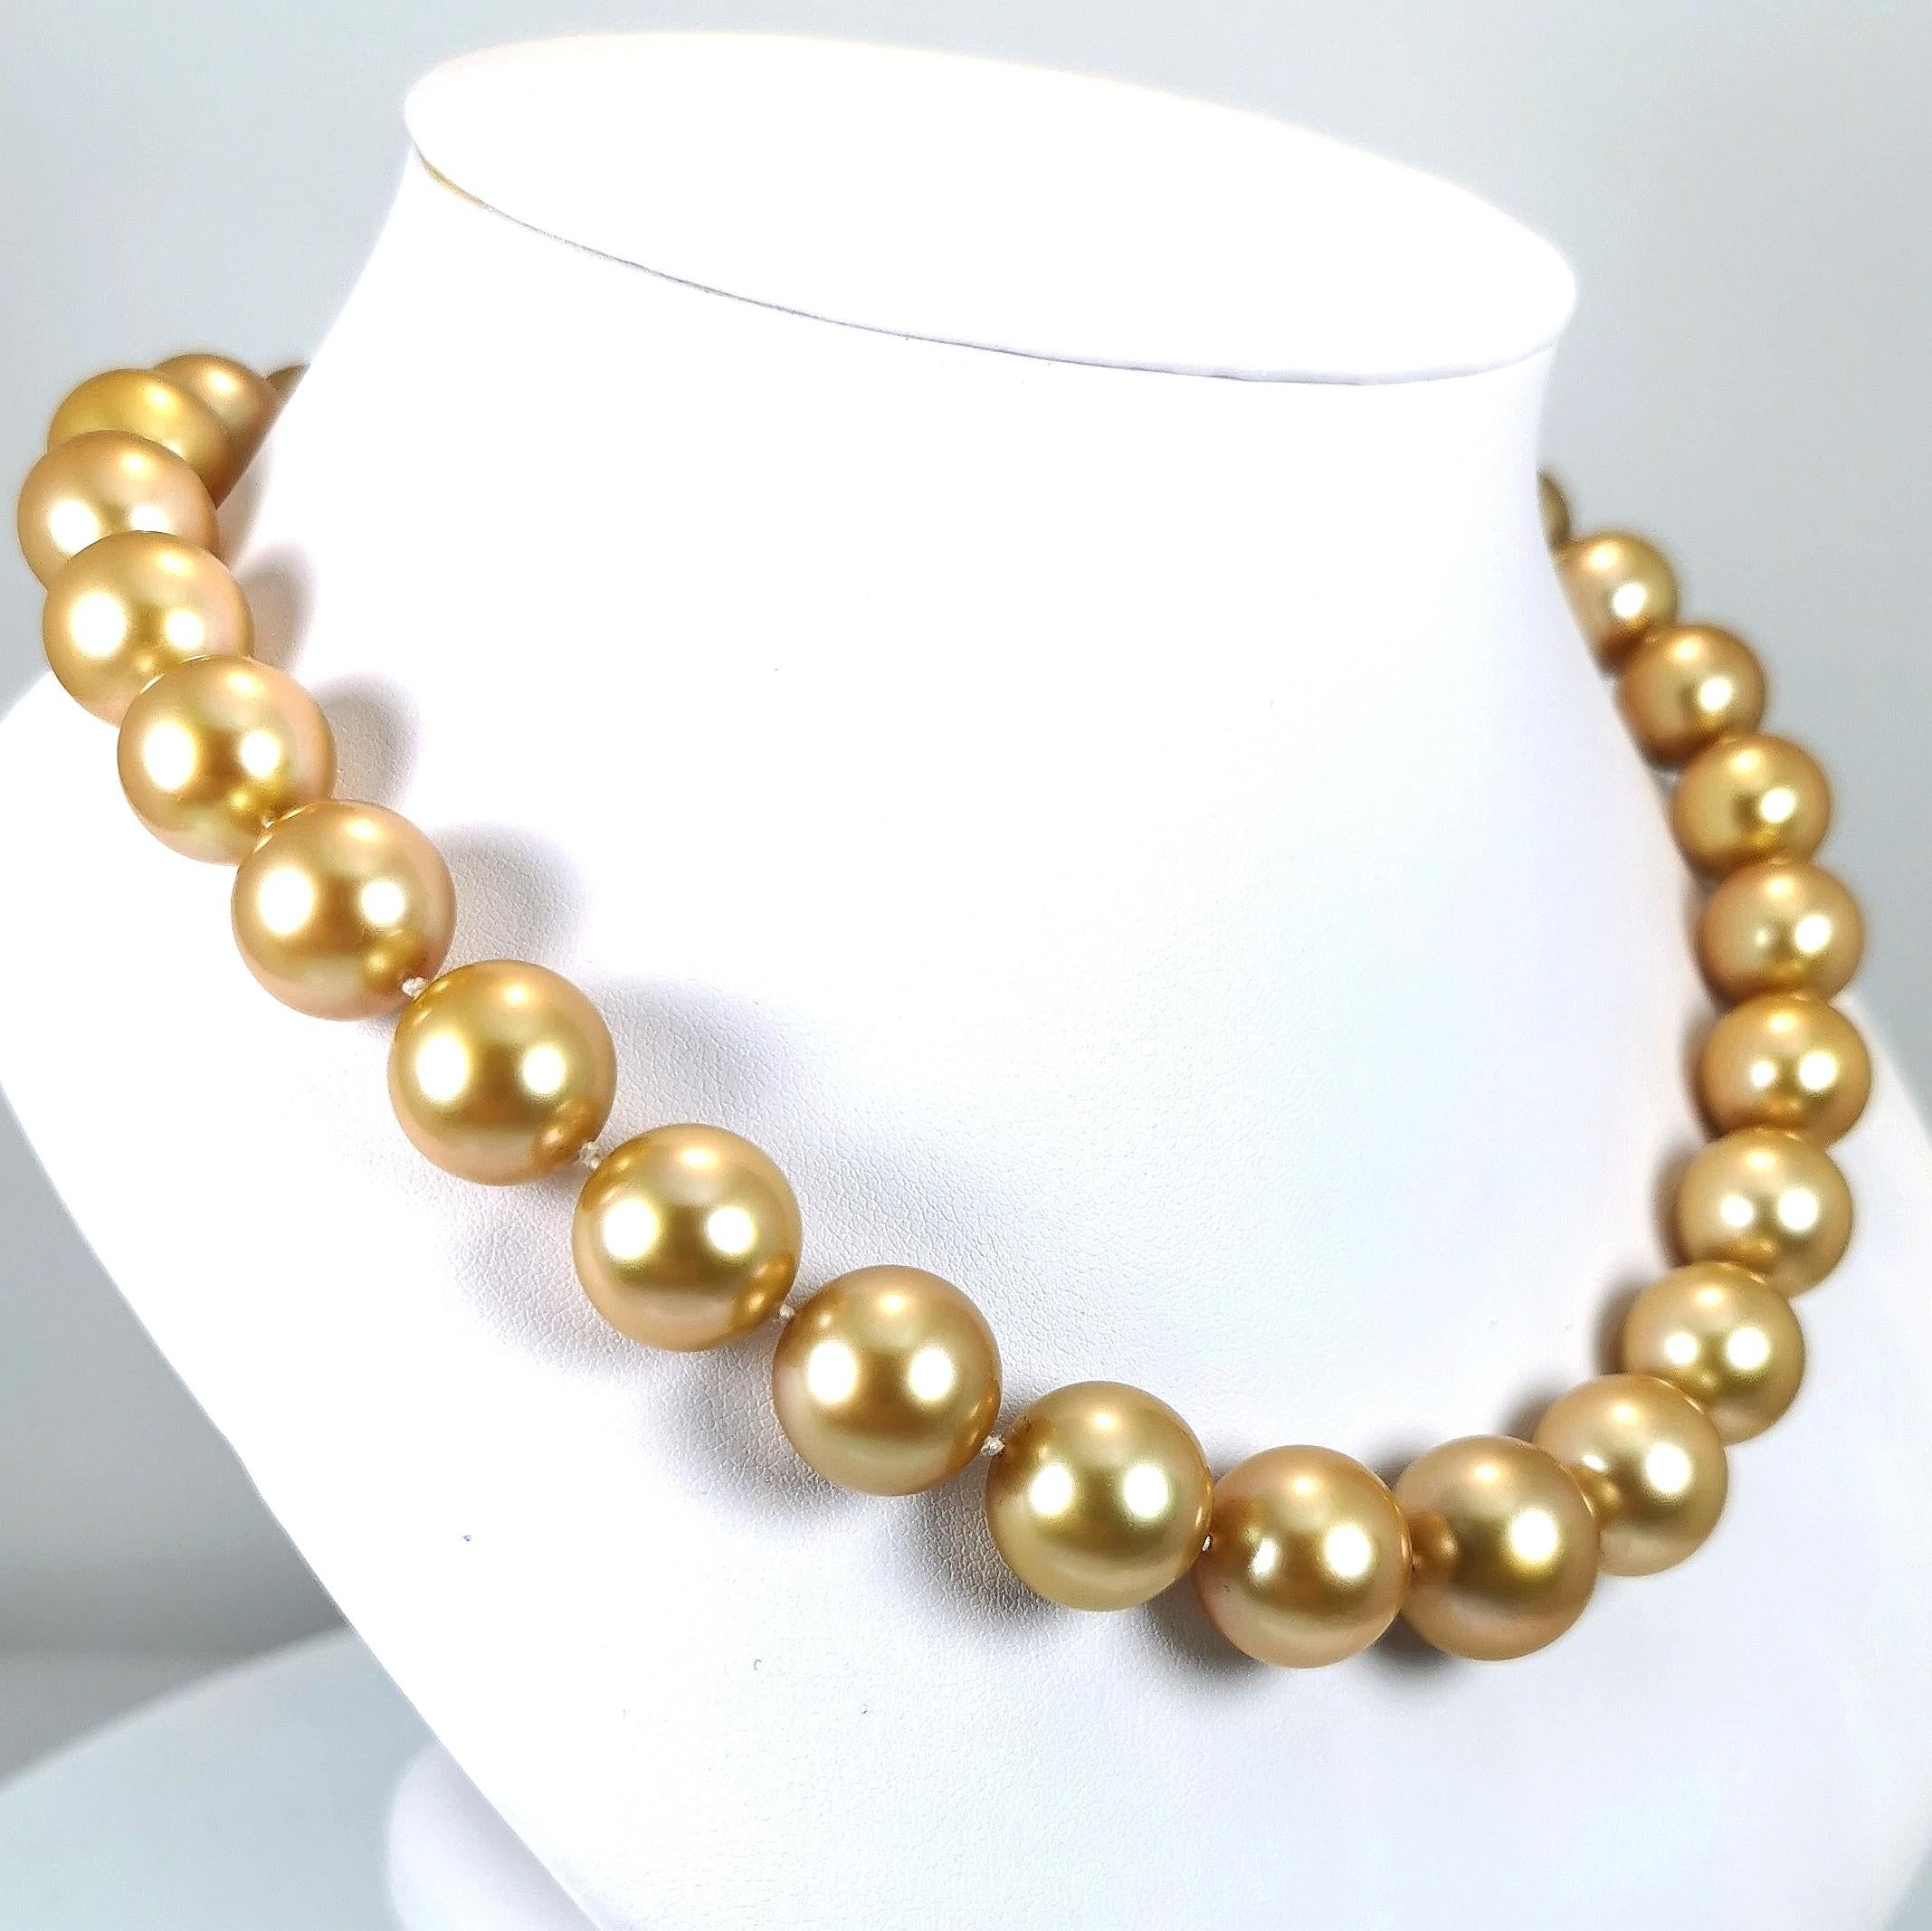 Top Gem Golden Southsea Necklace with 18k Gold Diamonds Clasp In New Condition For Sale In Préverenges, VD